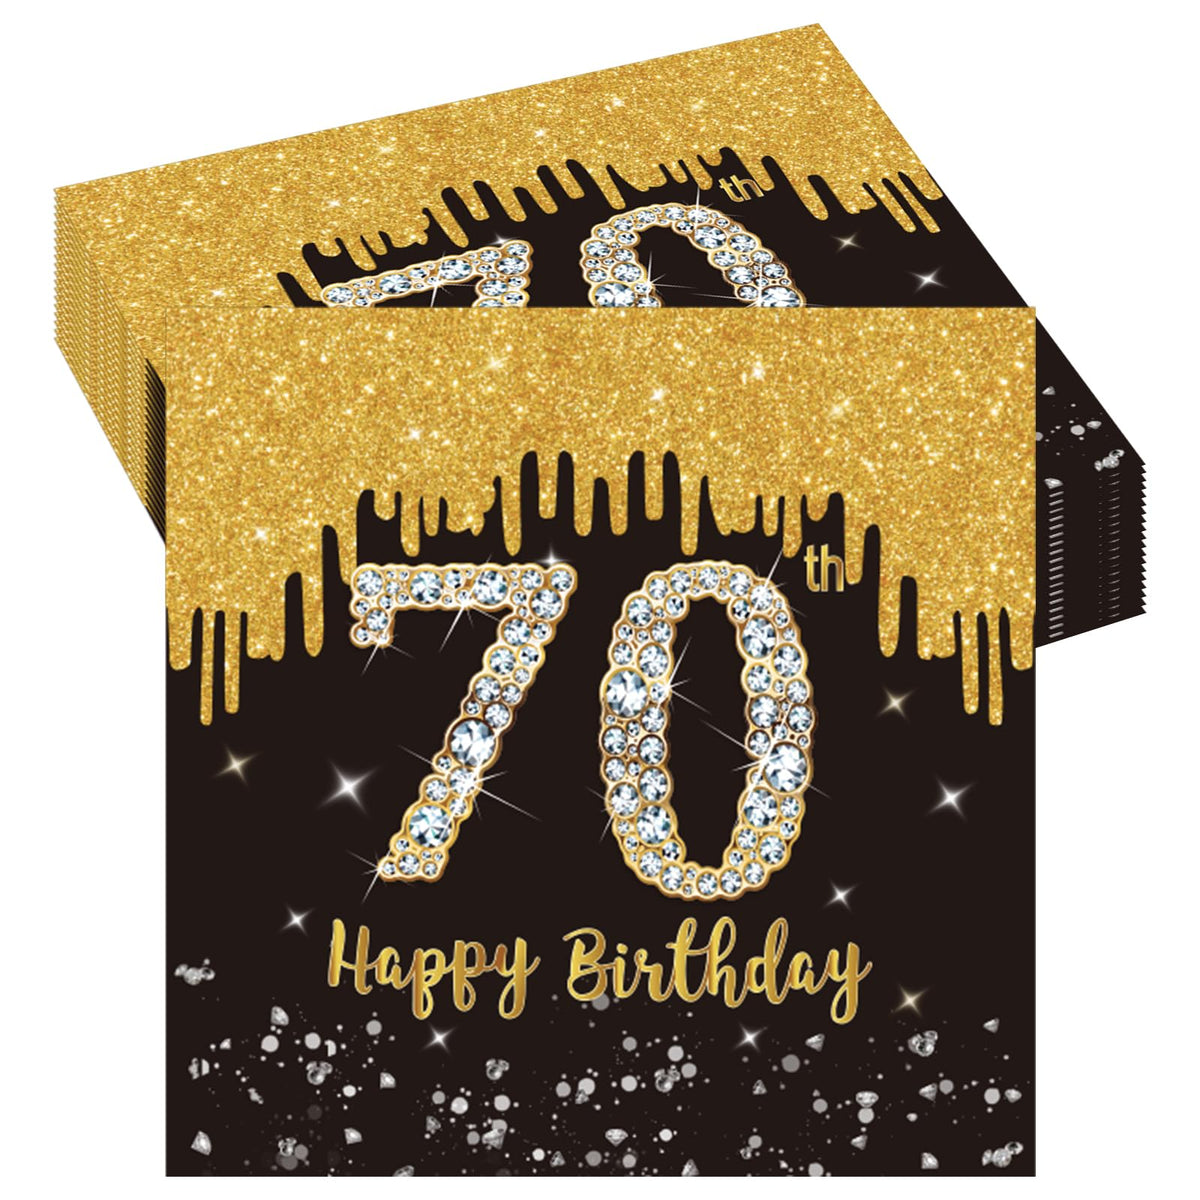 Black Gold 70th Birthday Tablewere Set Paper Napkins Tablecloth Disposable Cake Plates Birthday Round Dinner Plates for Birthday Party Supplies